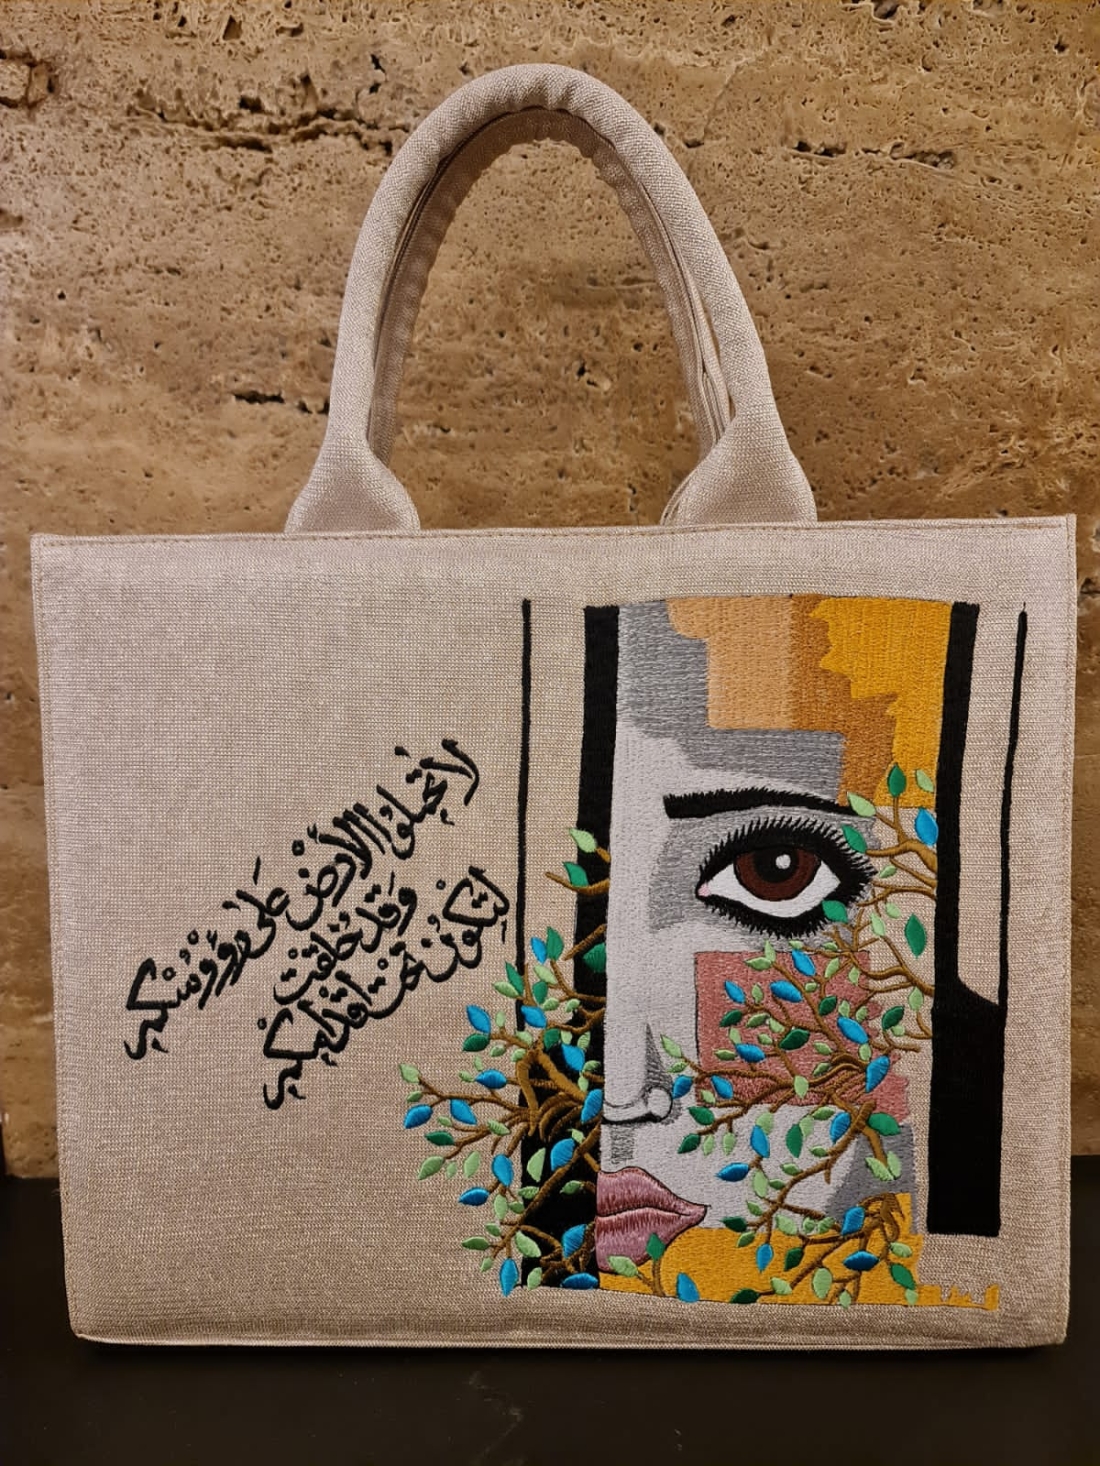 Be Positive Embroidered Handmade Tote Bag 